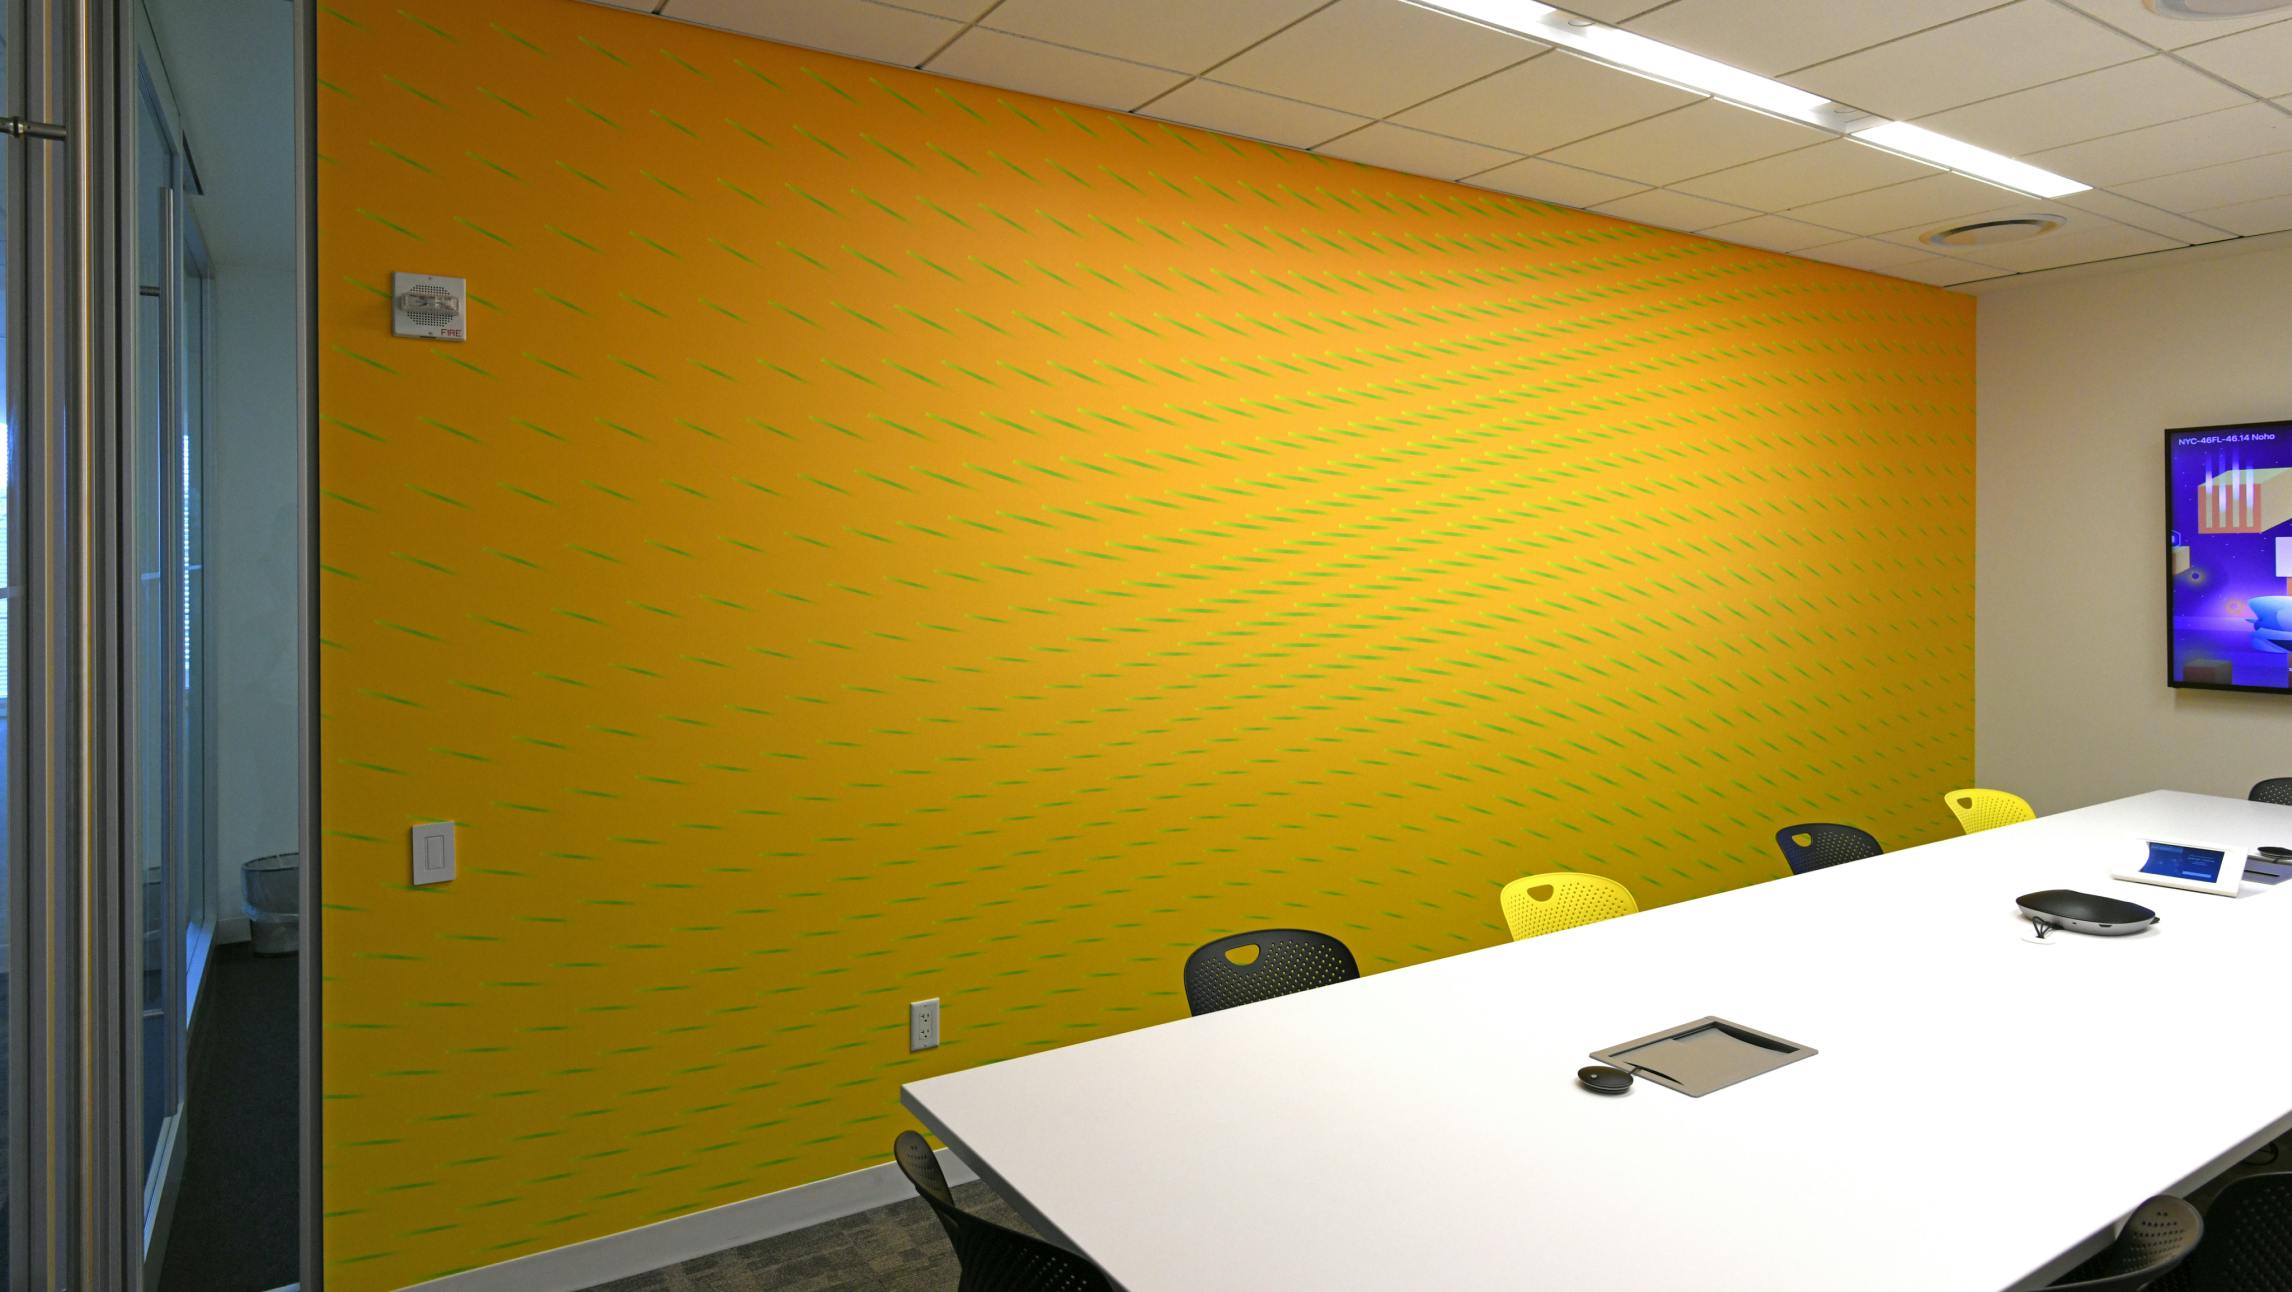 A Datadog conferene room with a custom wallpaper. Th wallpaper is yellow and has many green dashes arranged at varying angles, similar to the digital rendering above.